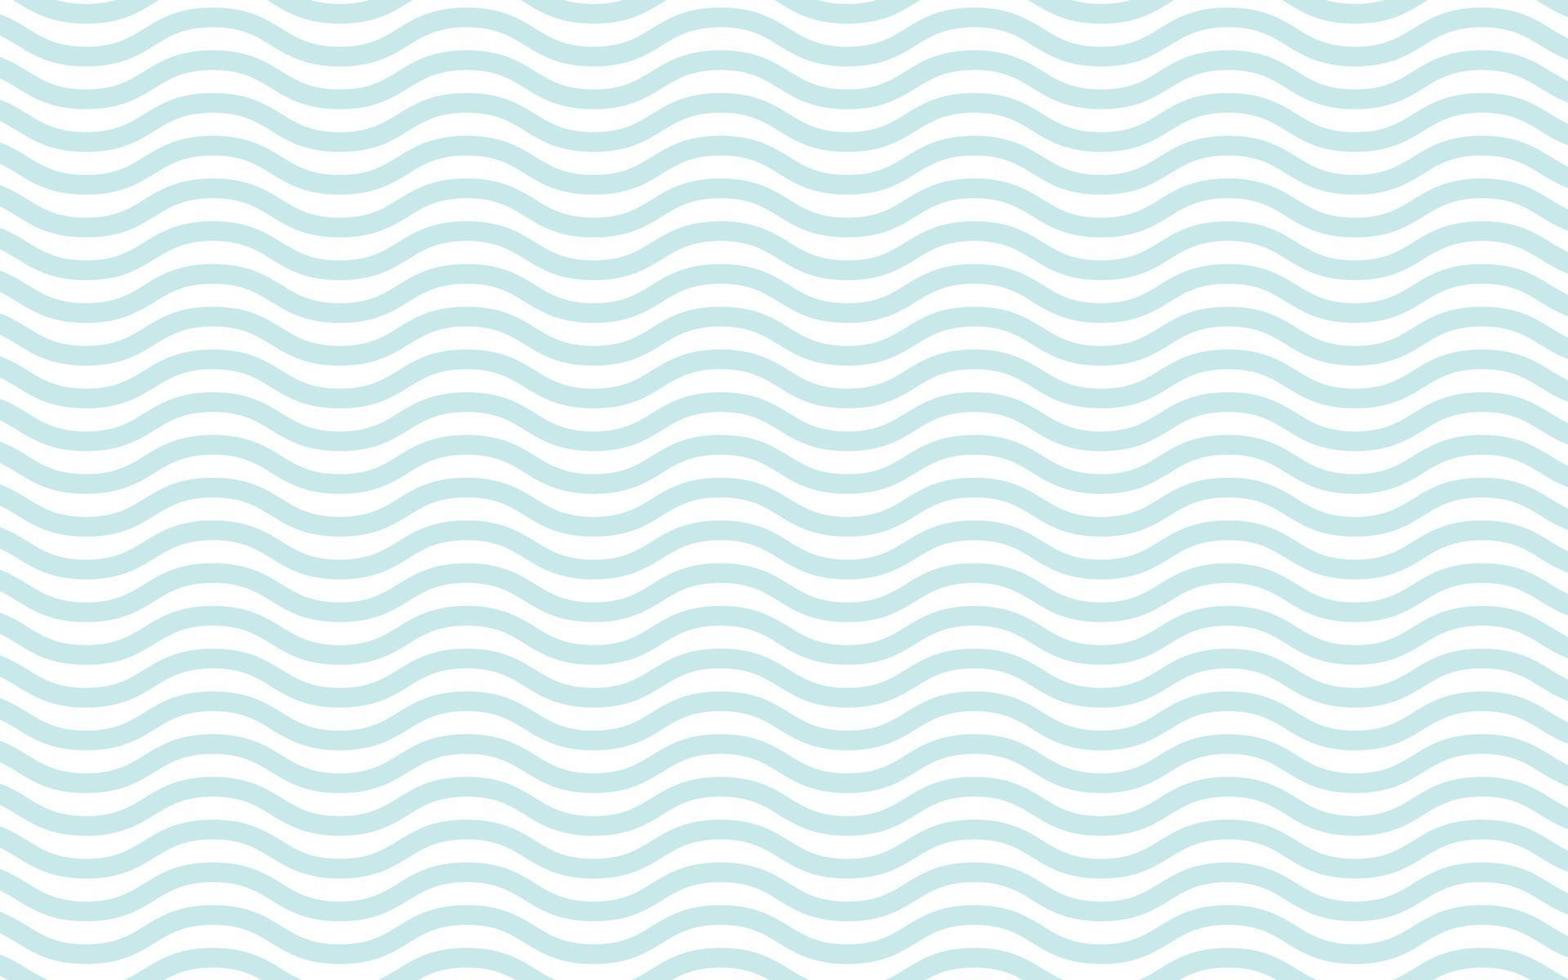 Blue waves abstract pattern background vector illustration